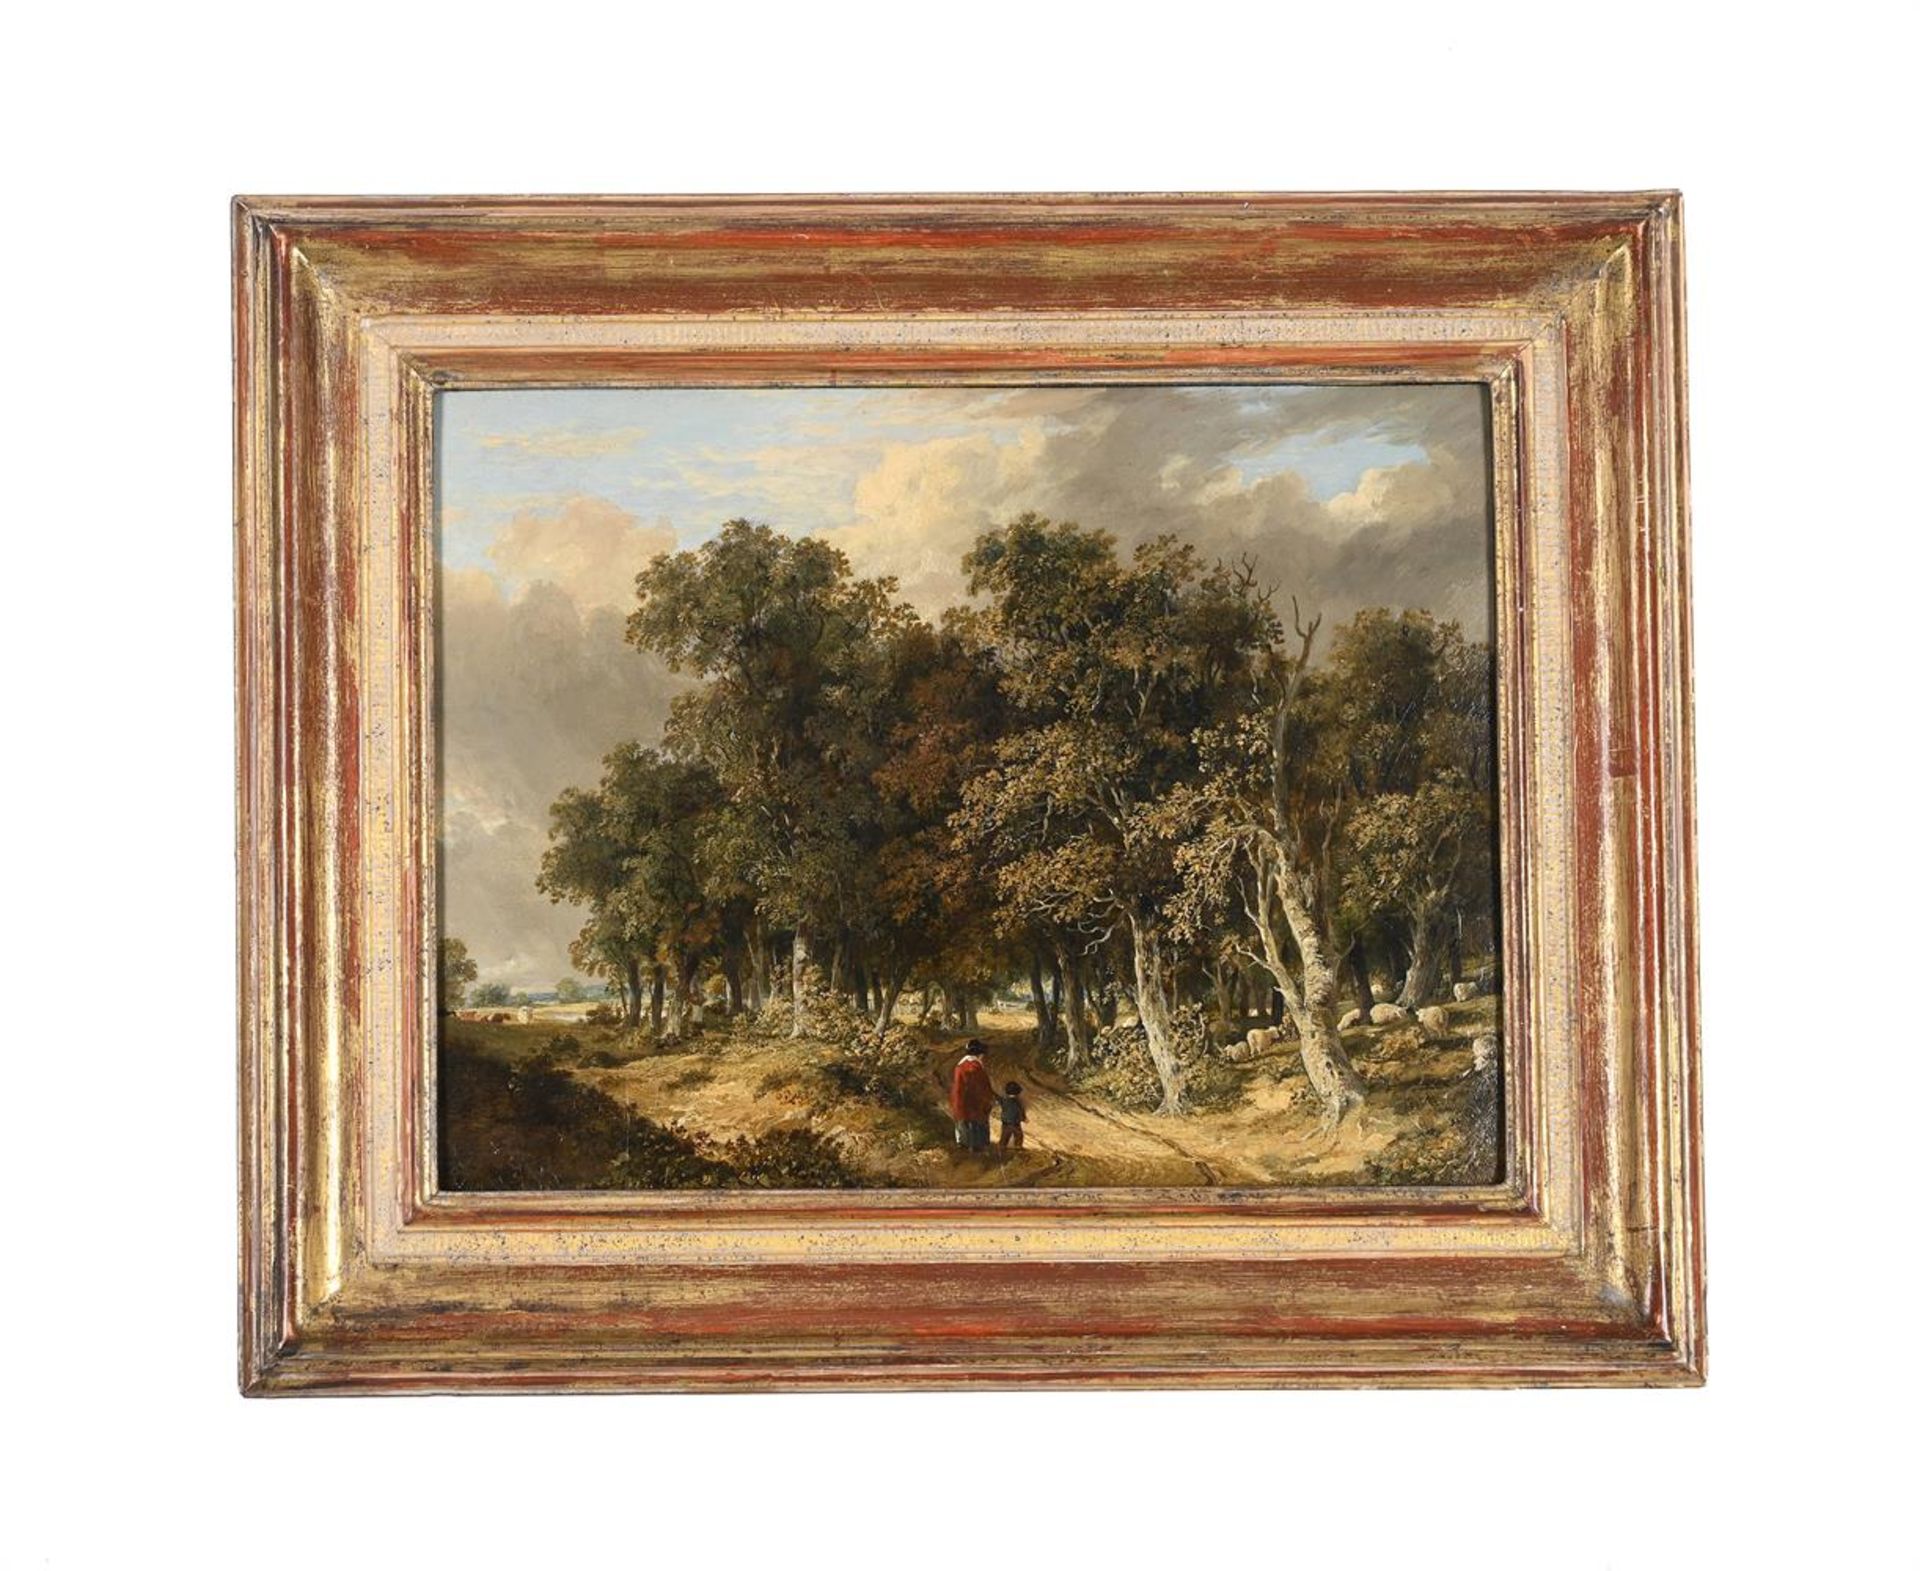 JAMES STARK (BRITISH 1794-1859), WOODED LANDSCAPE WITH A MOTHER AND CHILD ON A TRACK - Image 2 of 3